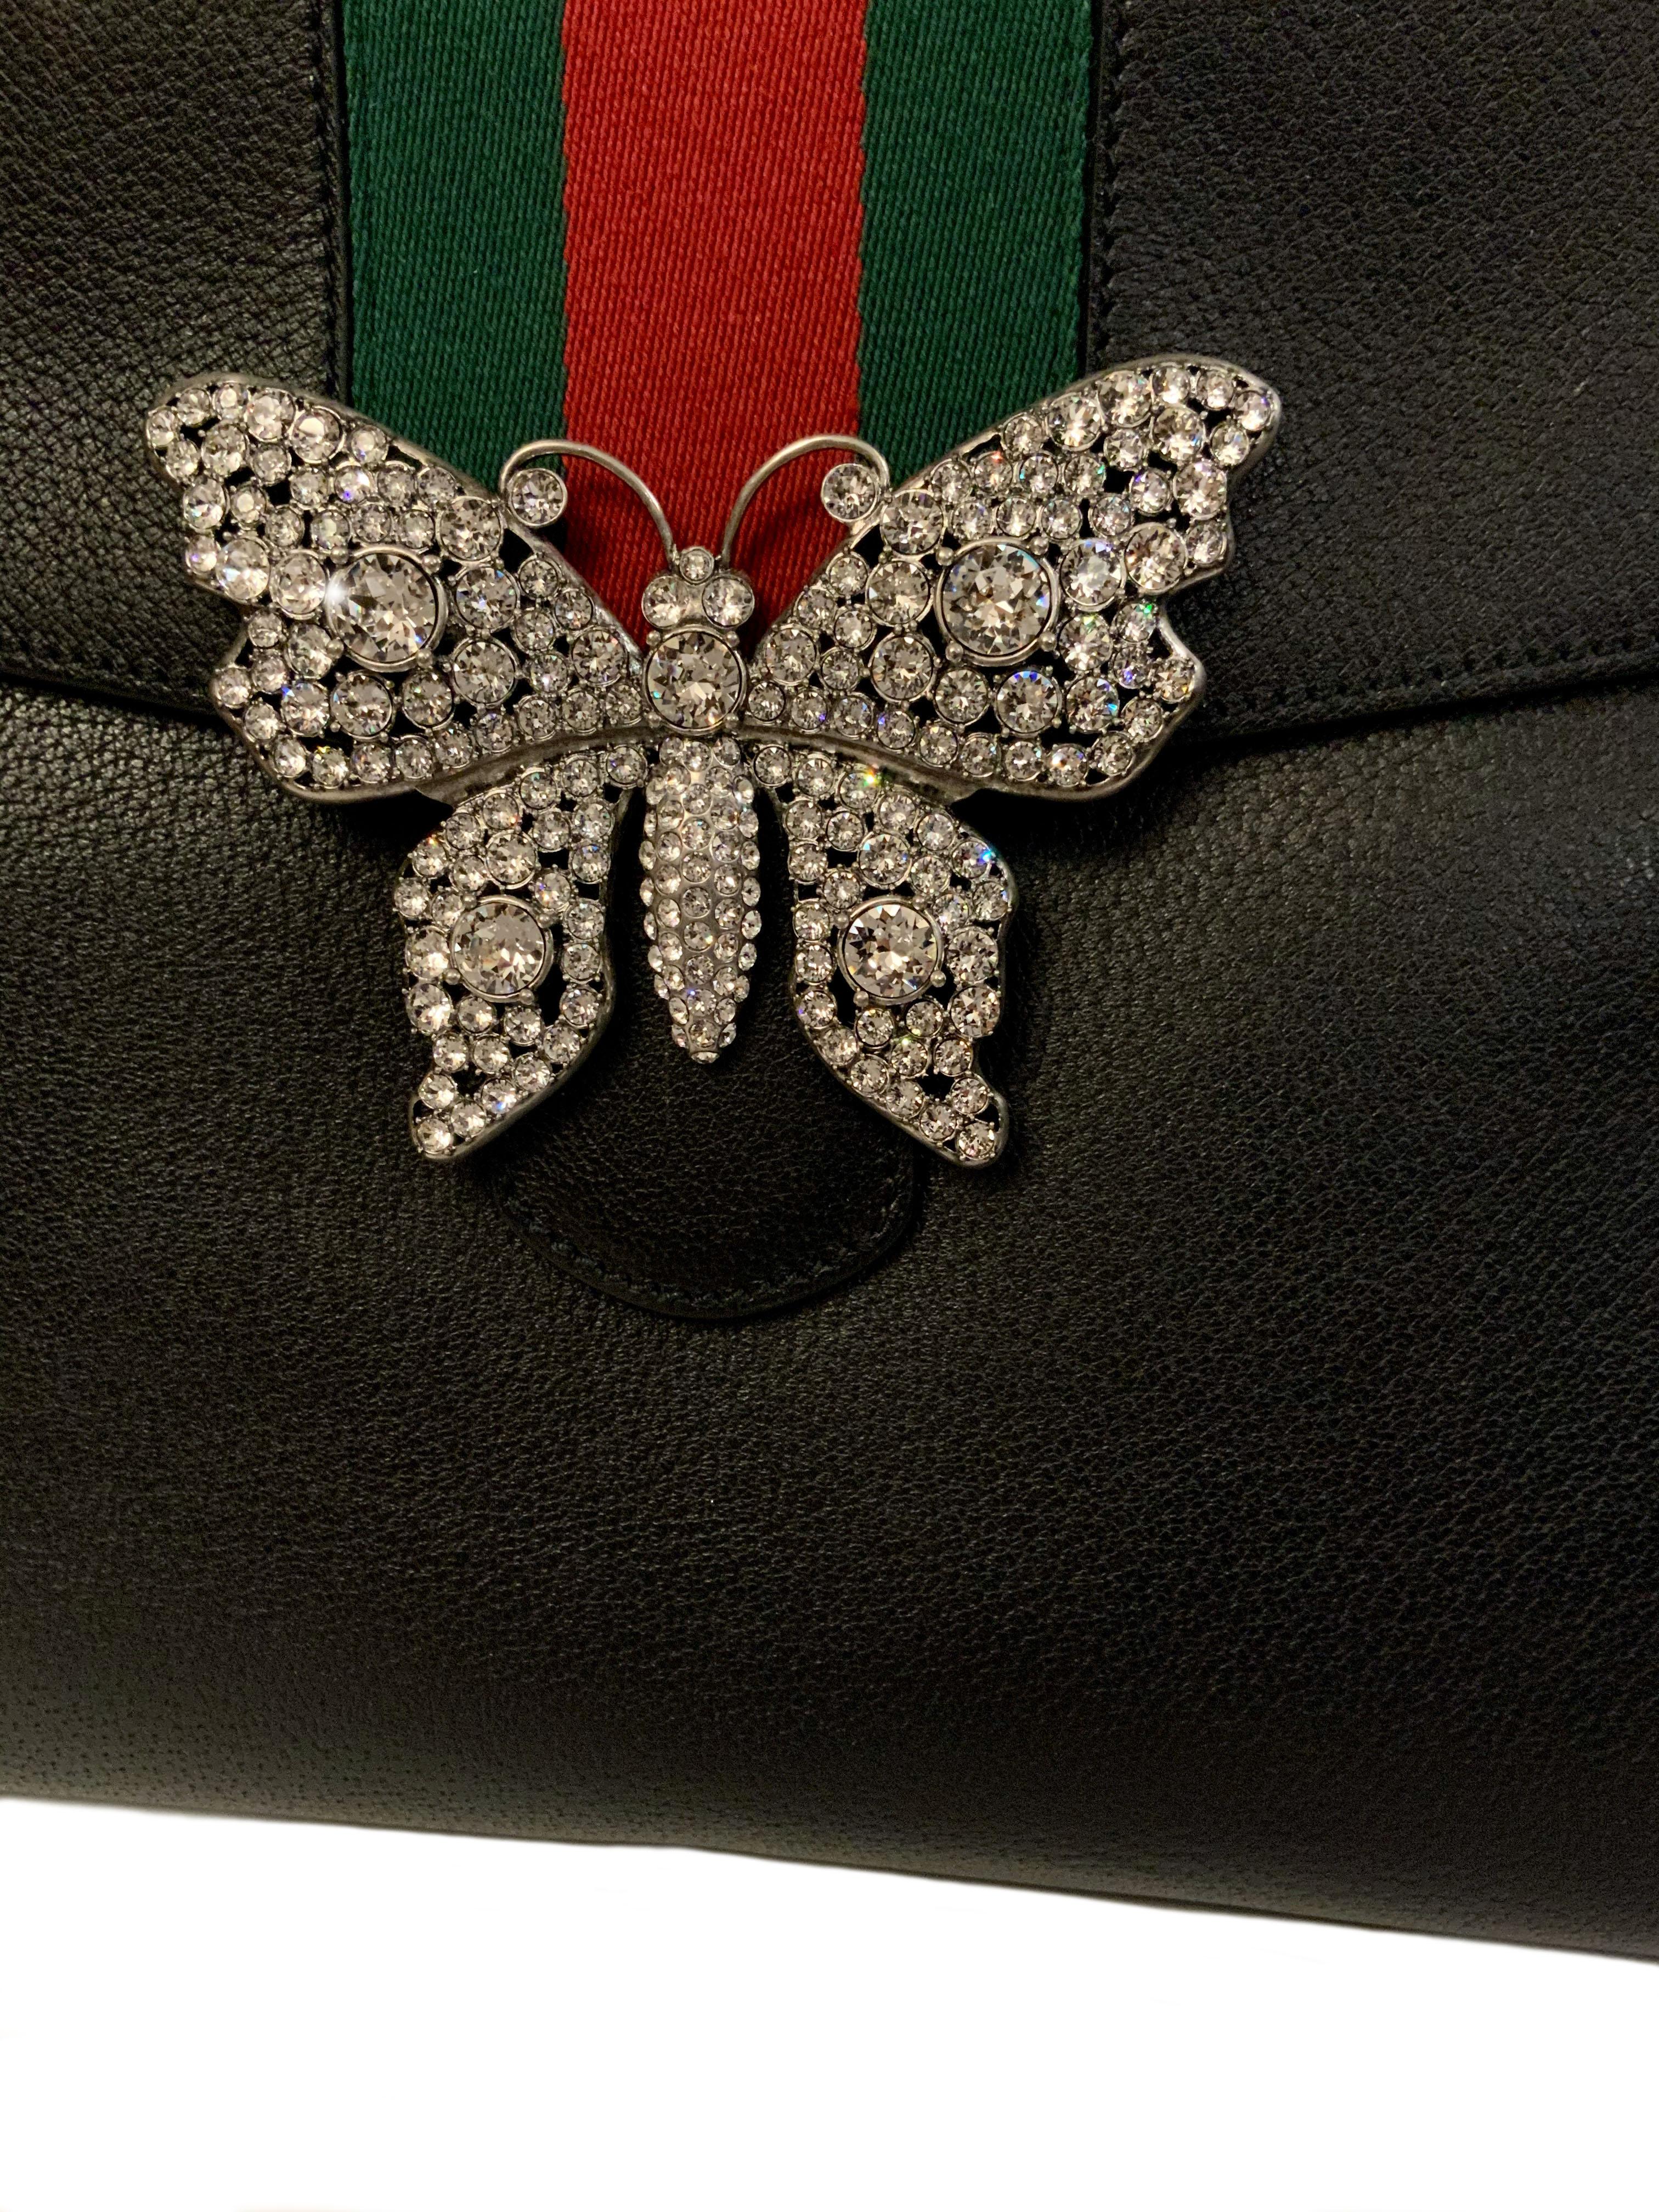 This pre-owned bag from Gucci is crafted in black calfskin leather.
It features a beautiful crystal butterfly on the front with a signature Gucci web detail on the flap, a rear pocket and a middle snap closure. 
Its optional canvas shoulder strap